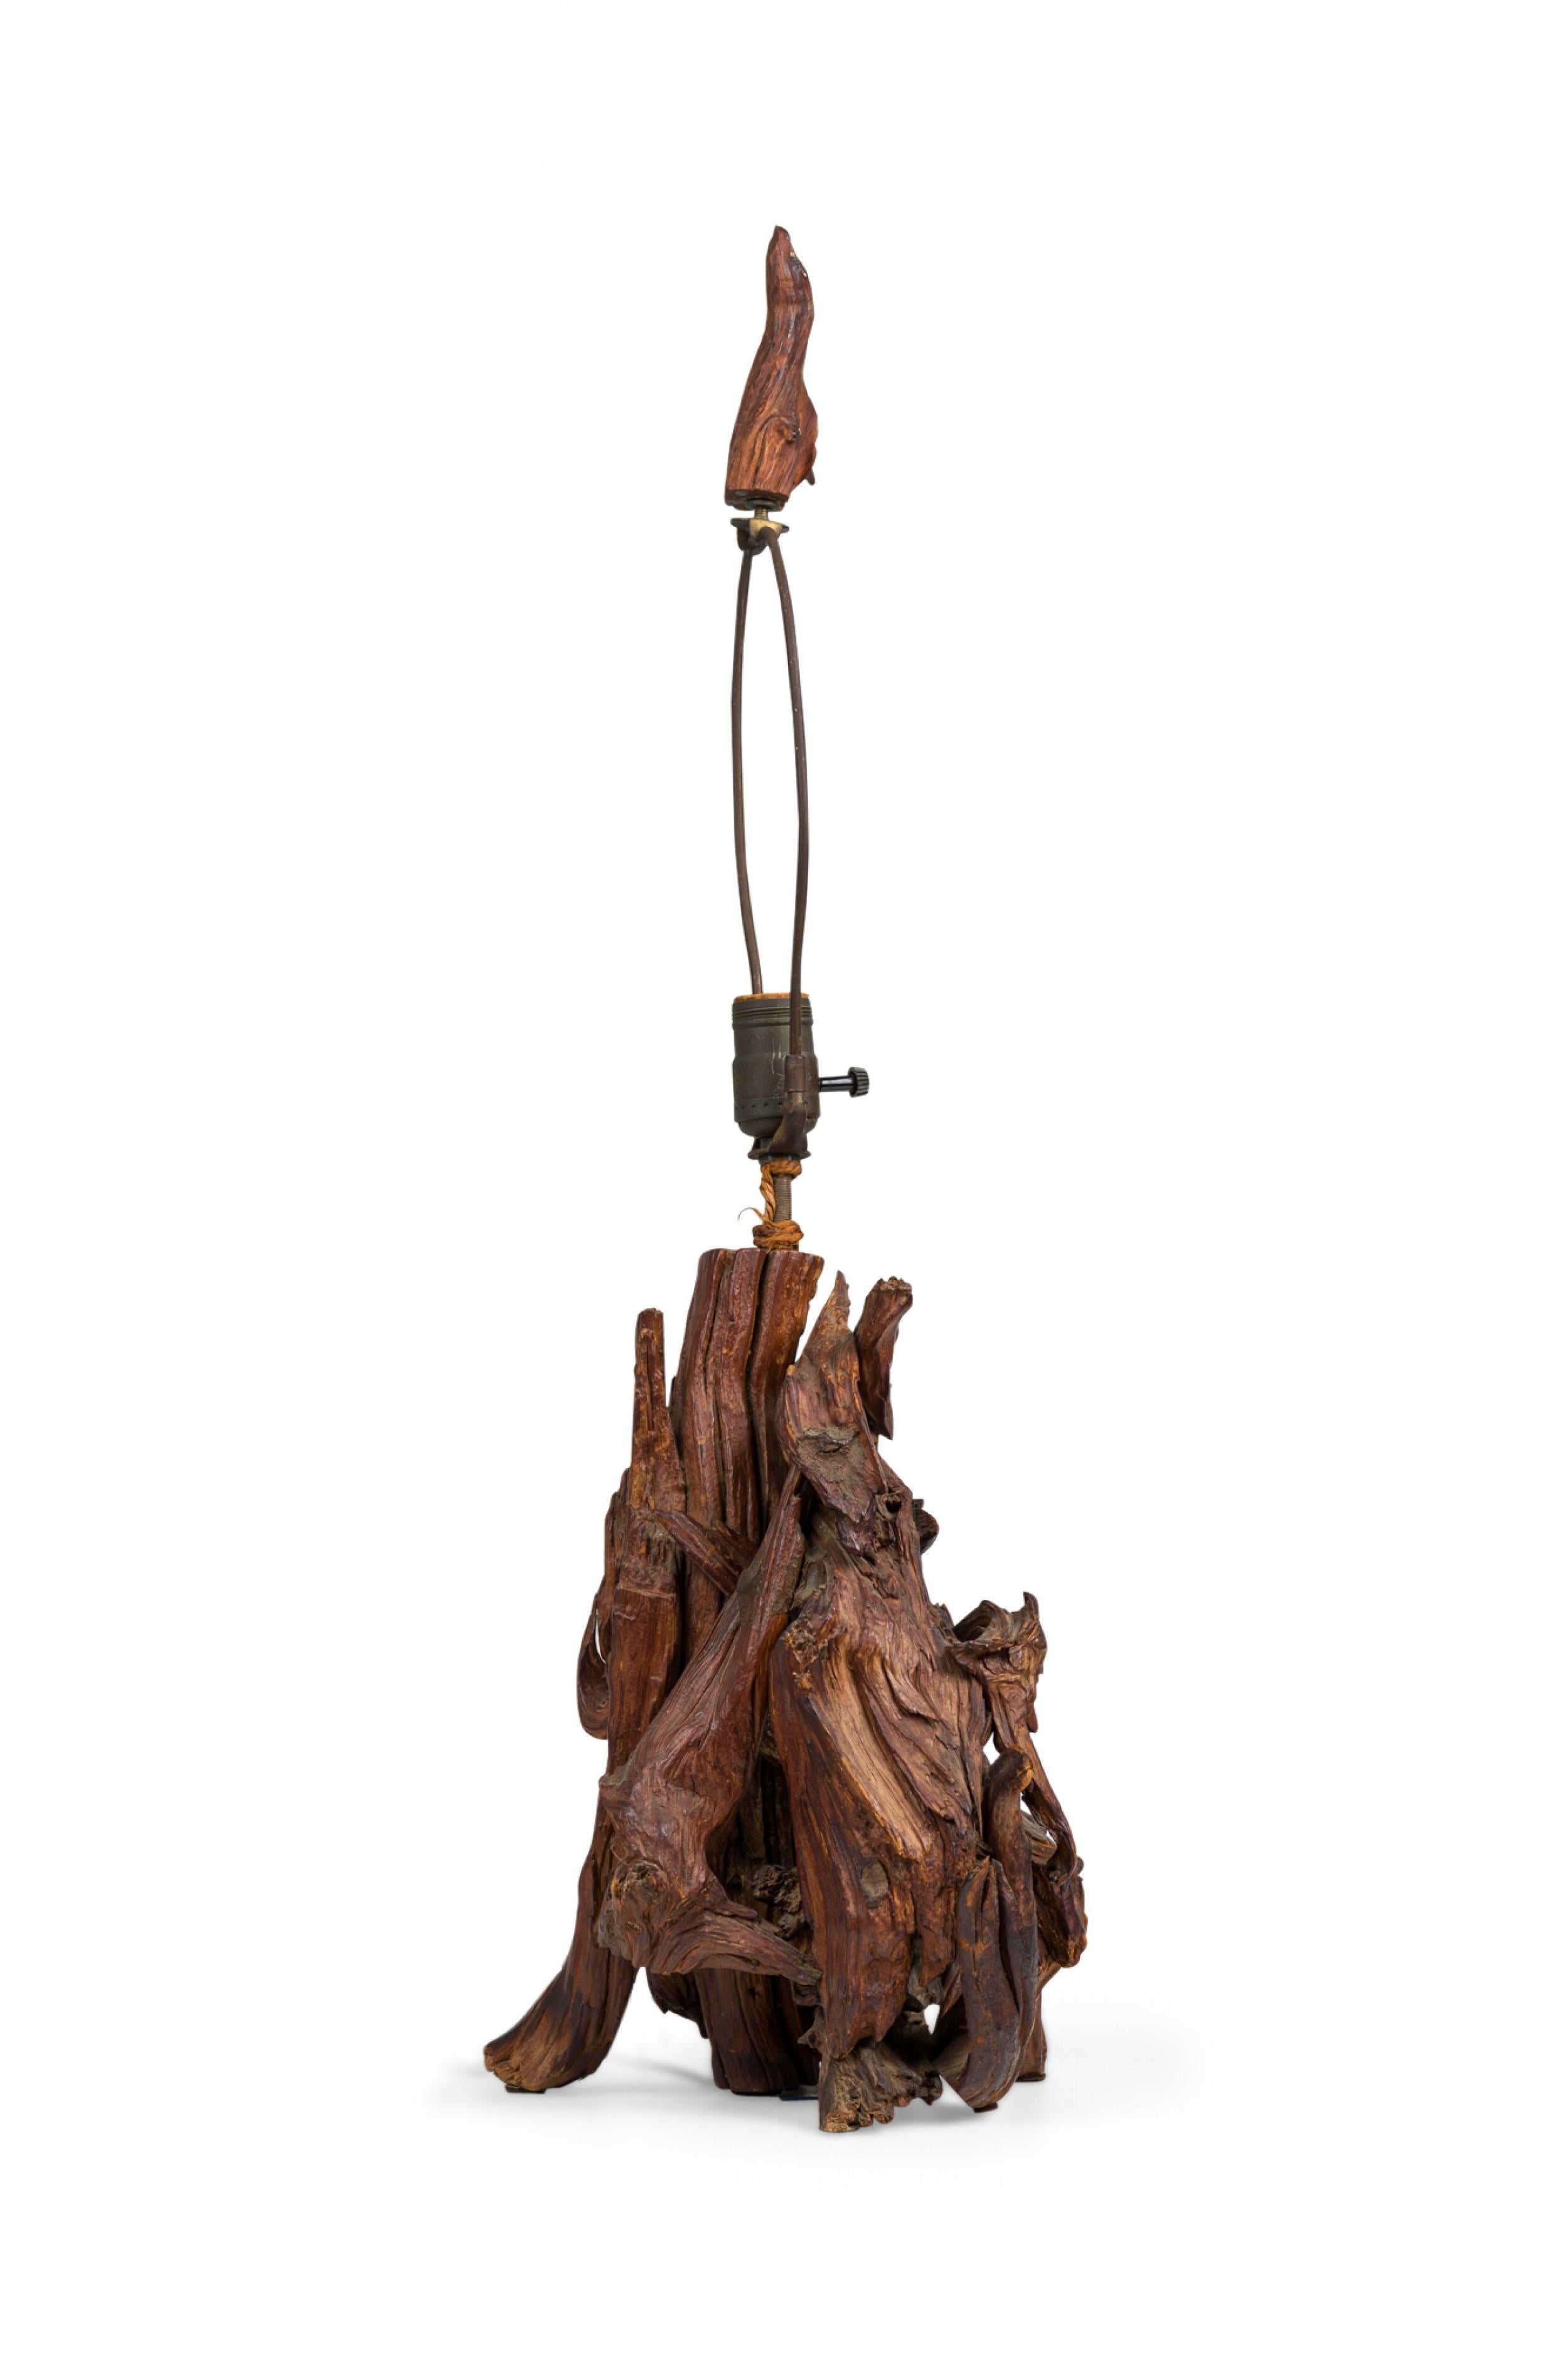 PAIR of Rustic Adirondack organic driftwood table lamps with similar openwork bodies composed of intertwined branches with ascending trunk stems, embedded functioning brass light switch sockets with harps, topped by driftwood finials. (PRICED AS